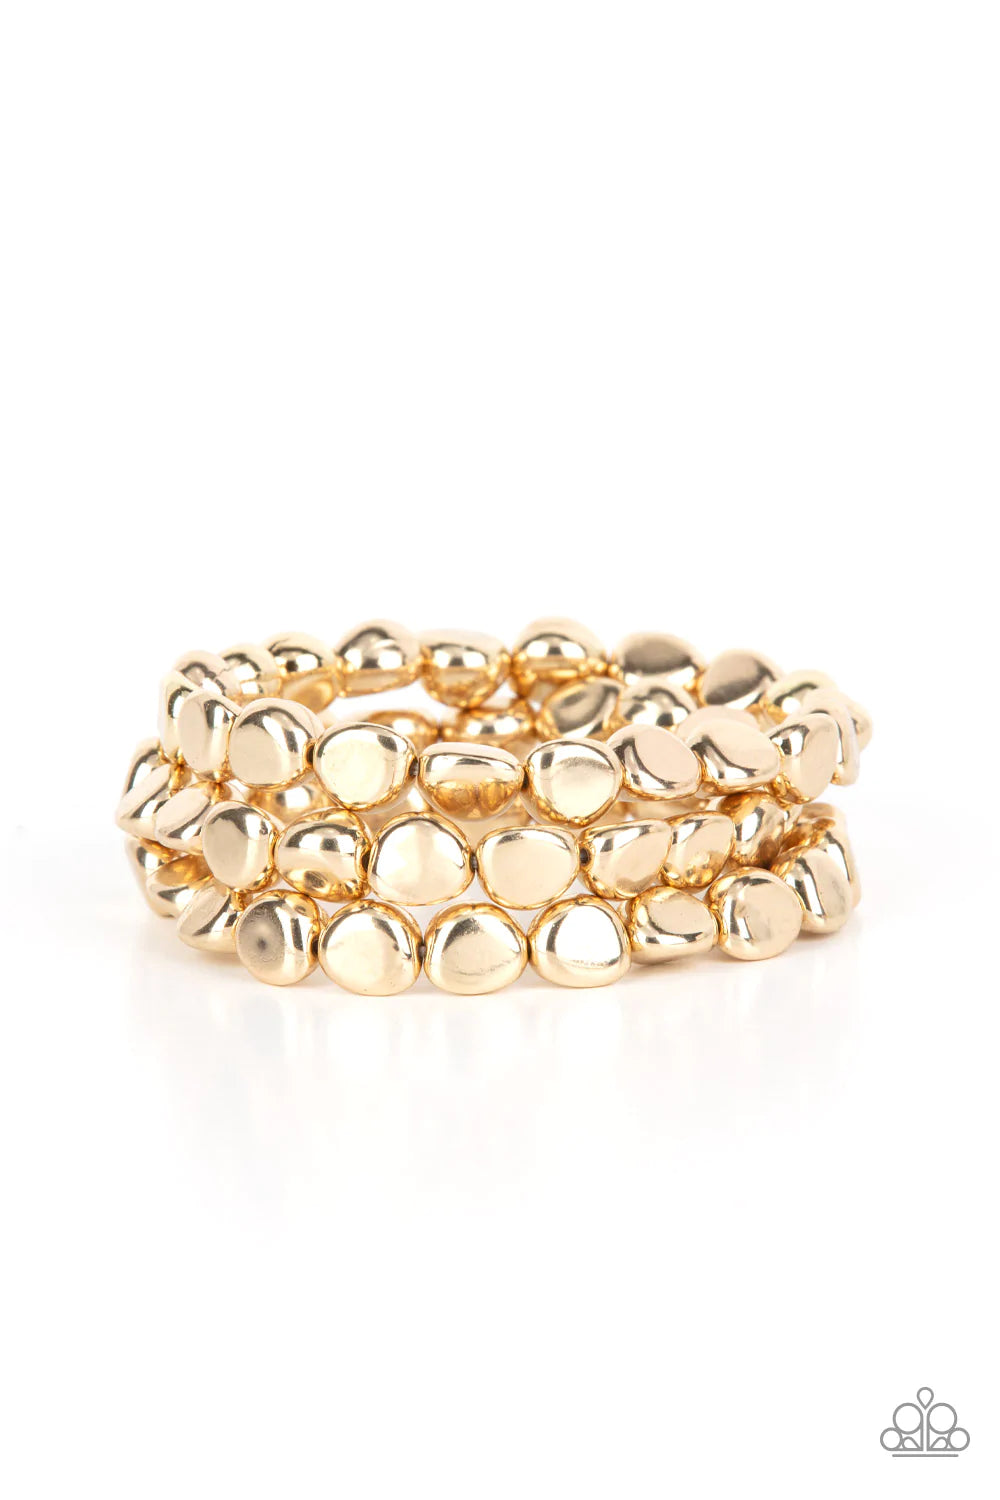 Paparazzi Accessories HAUTE Stone - Gold Featuring irregular stone shapes, a shiny series of gold beads are threaded along stretchy bands around the wrist for a bold pop of monochromatic magic. Sold as one set of three bracelets. Jewelry